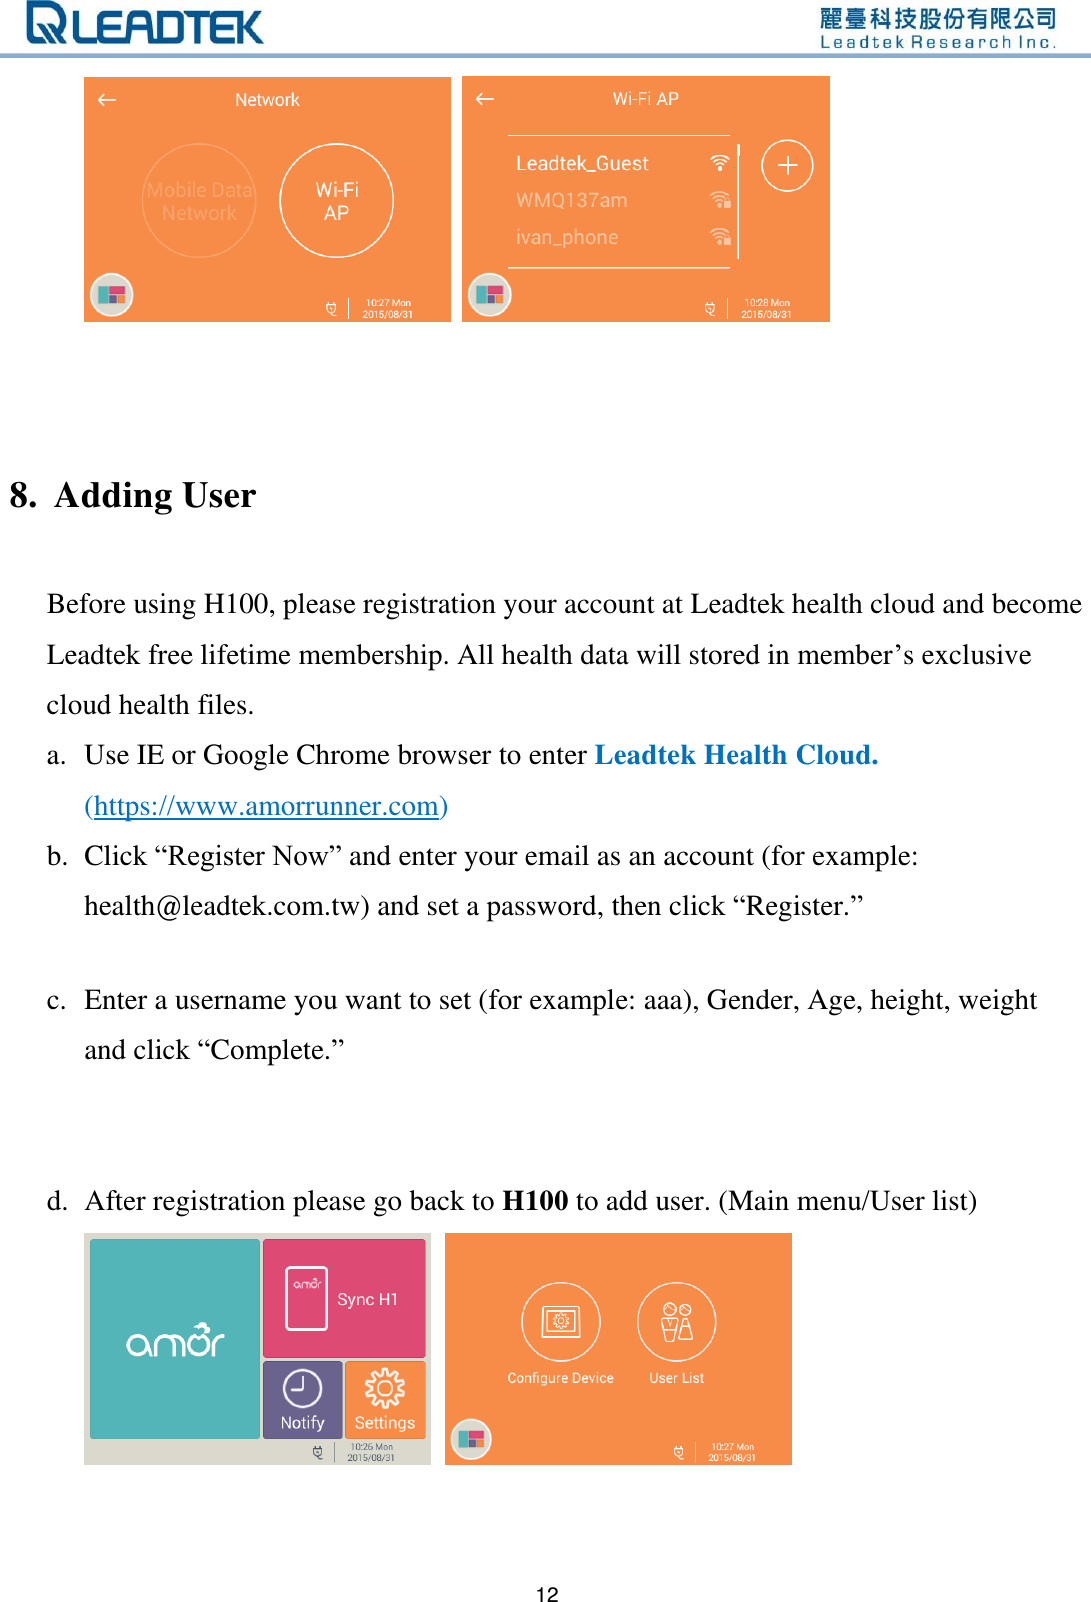   12         8. Adding User  Before using H100, please registration your account at Leadtek health cloud and become Leadtek free lifetime membership. All health data will stored in member’s exclusive cloud health files.   a. Use IE or Google Chrome browser to enter Leadtek Health Cloud. (https://www.amorrunner.com) b. Click “Register Now” and enter your email as an account (for example: health@leadtek.com.tw) and set a password, then click “Register.”  c. Enter a username you want to set (for example: aaa), Gender, Age, height, weight and click “Complete.”     d. After registration please go back to H100 to add user. (Main menu/User list)  